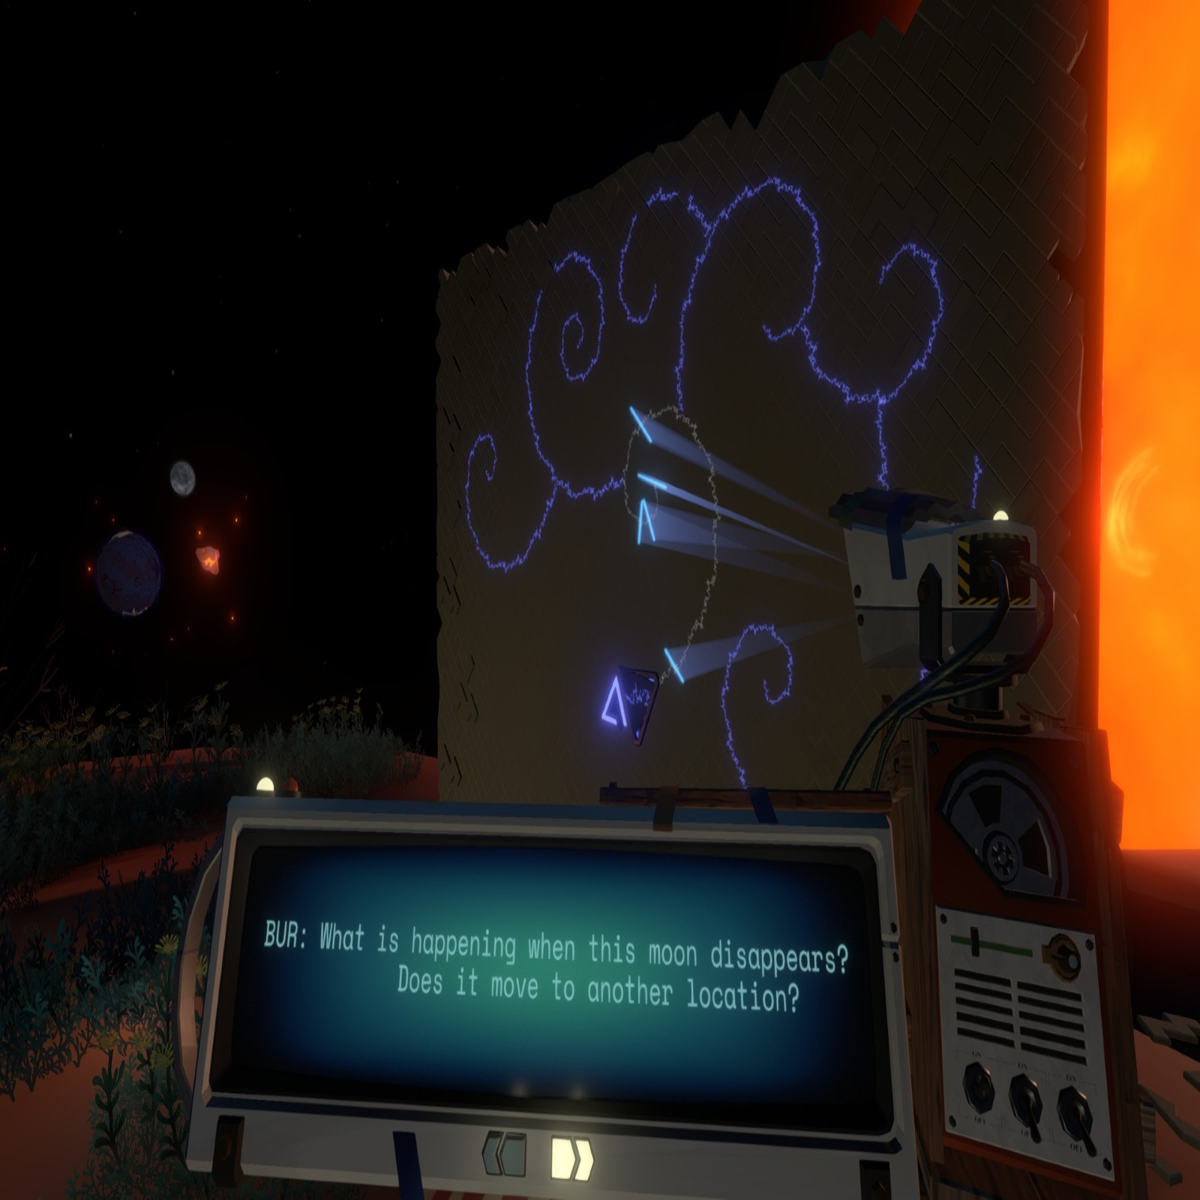 Prepare for liftoff: Outer Wilds is now available on Nintendo